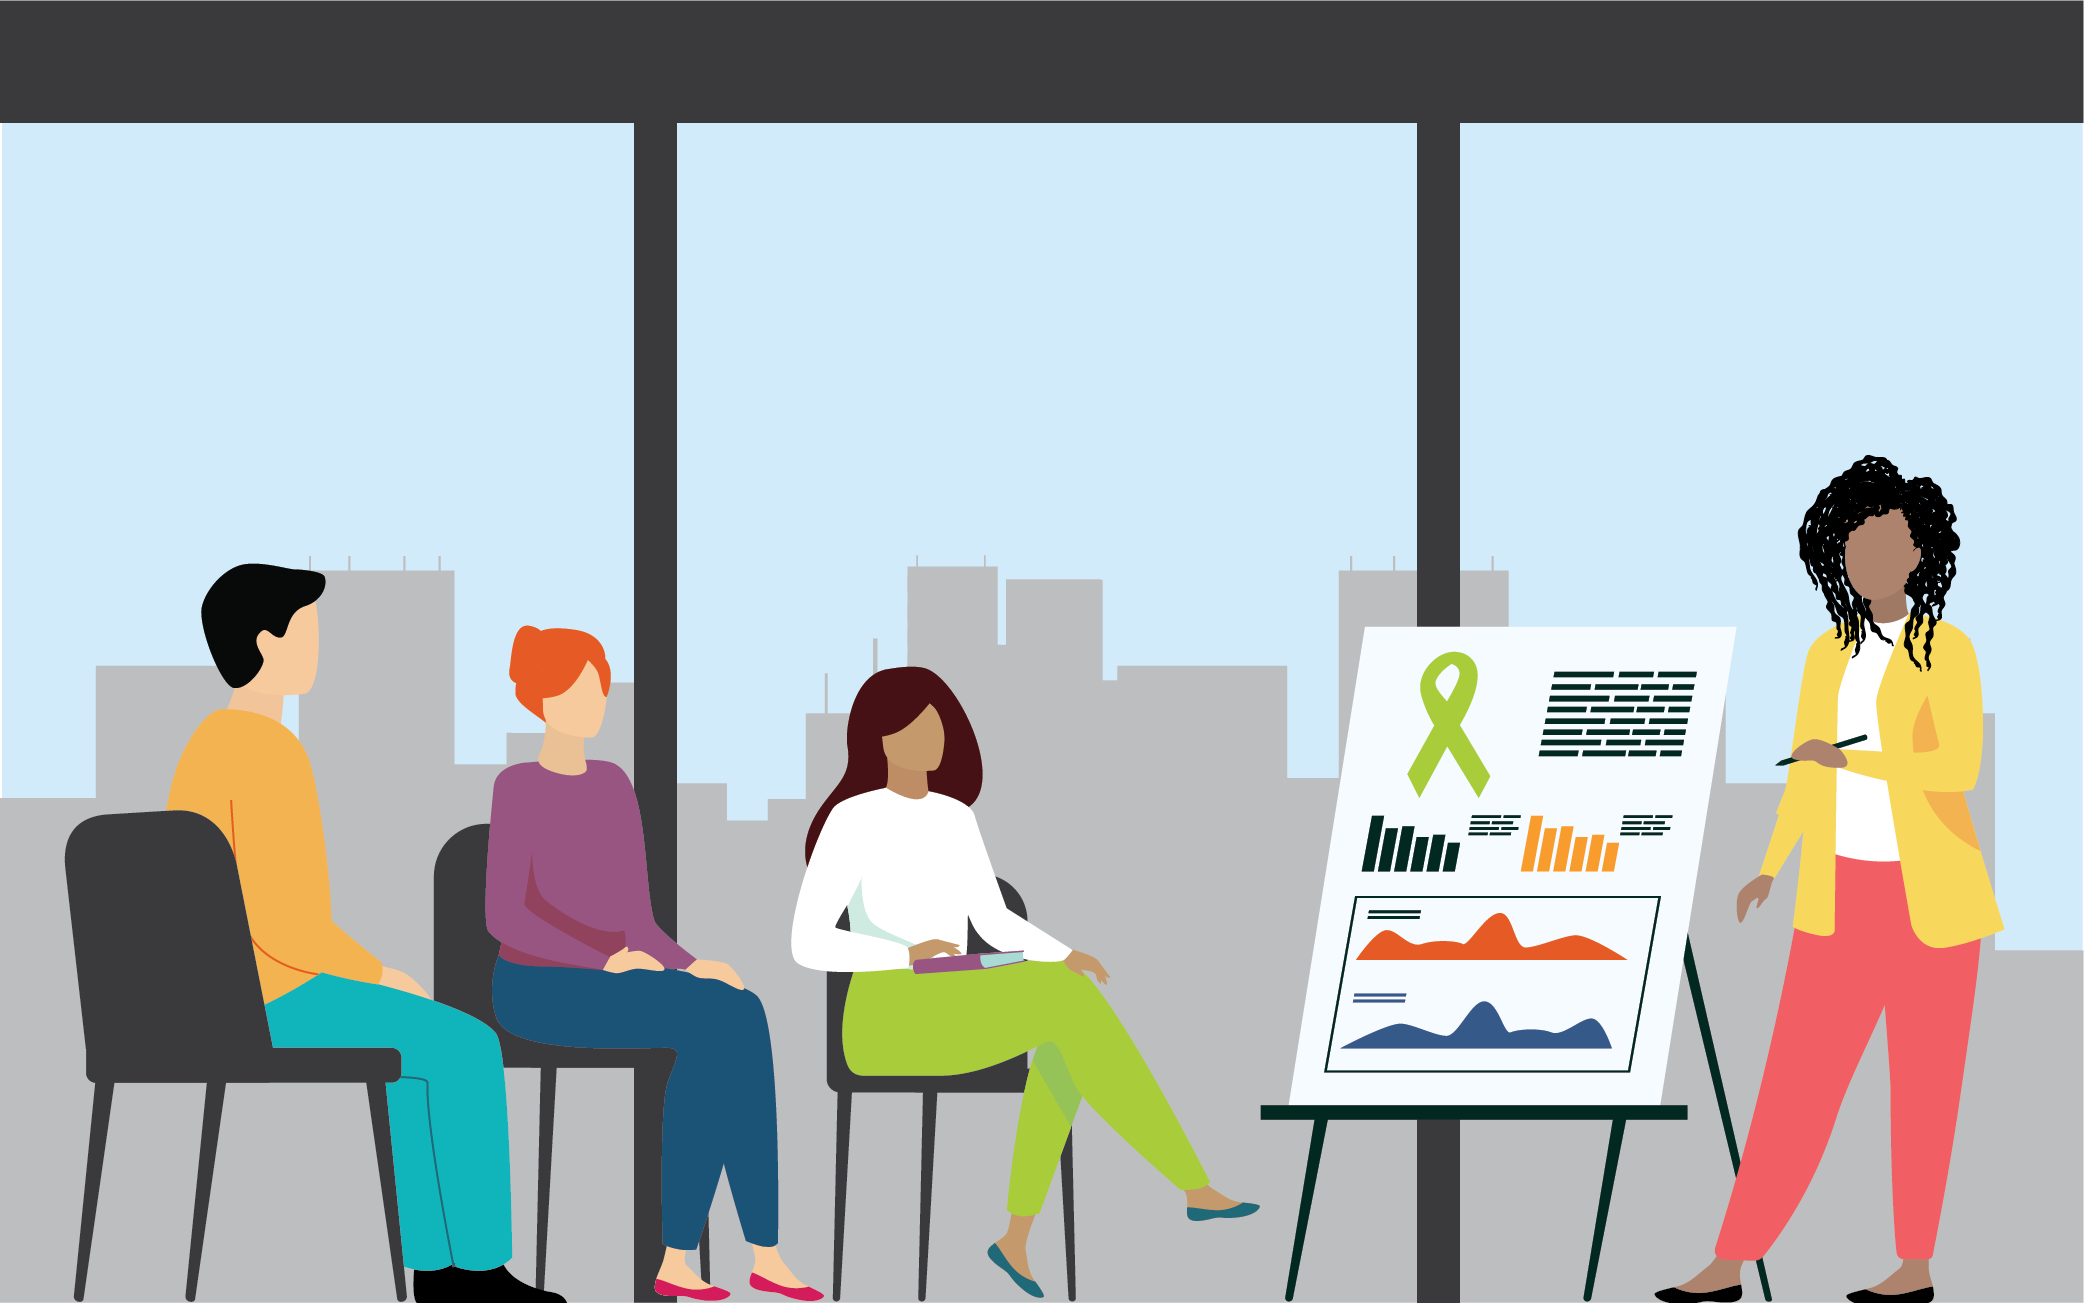 illustration of group of people sitting while one person stands and presents information on a chart to them